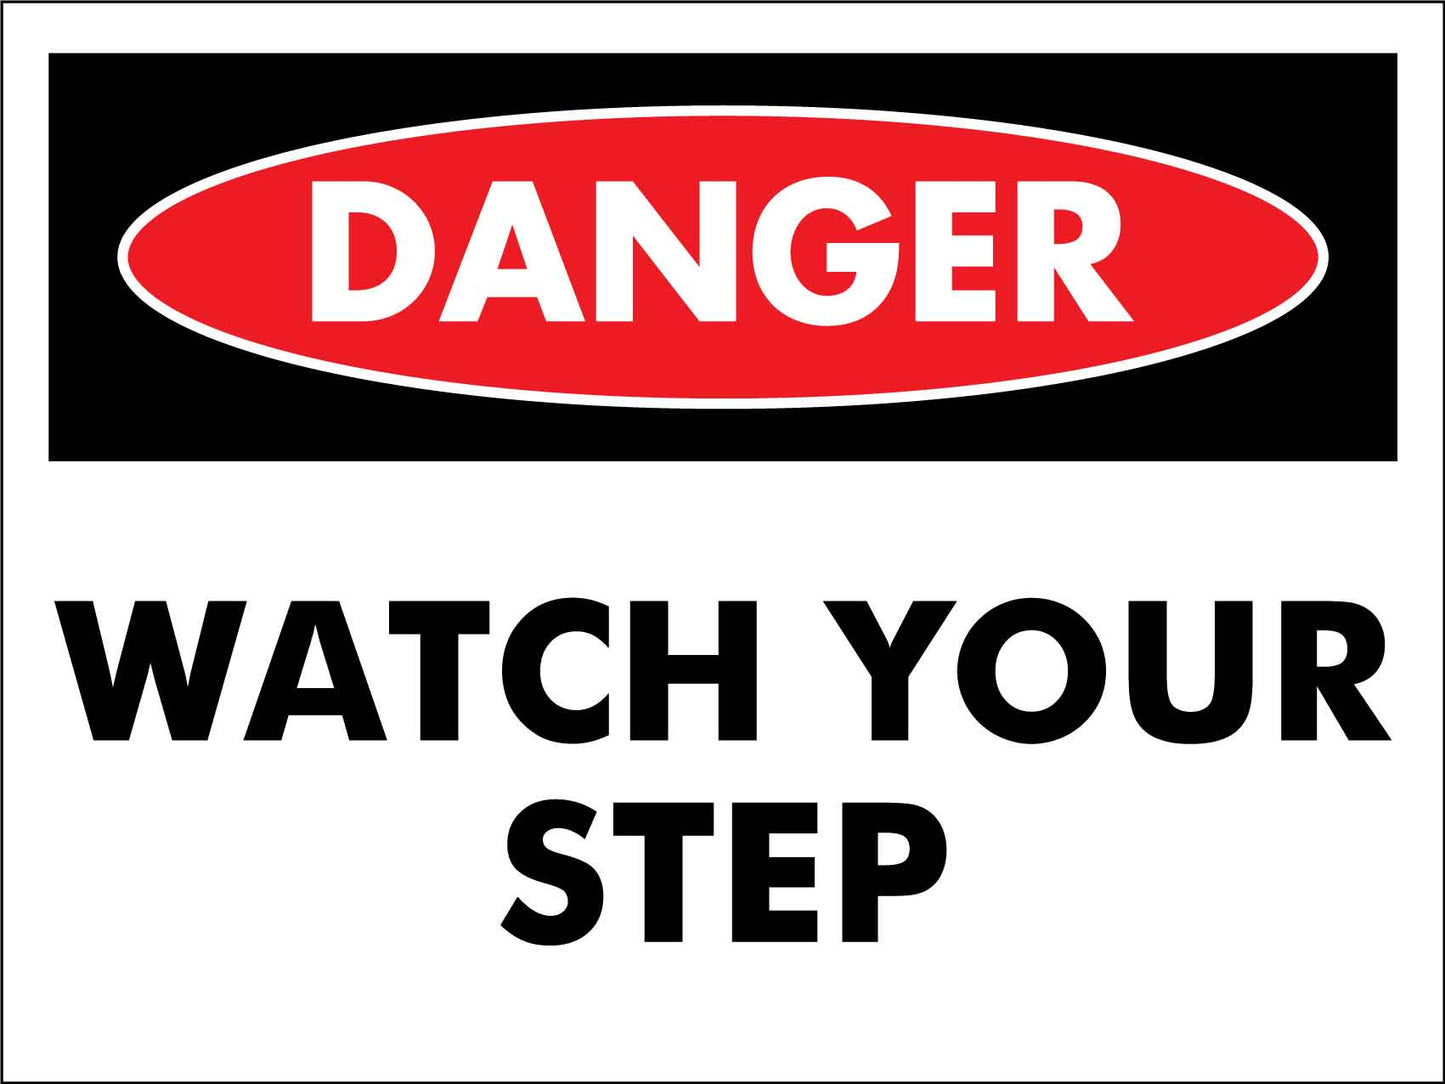 Danger Watch Your Step Sign